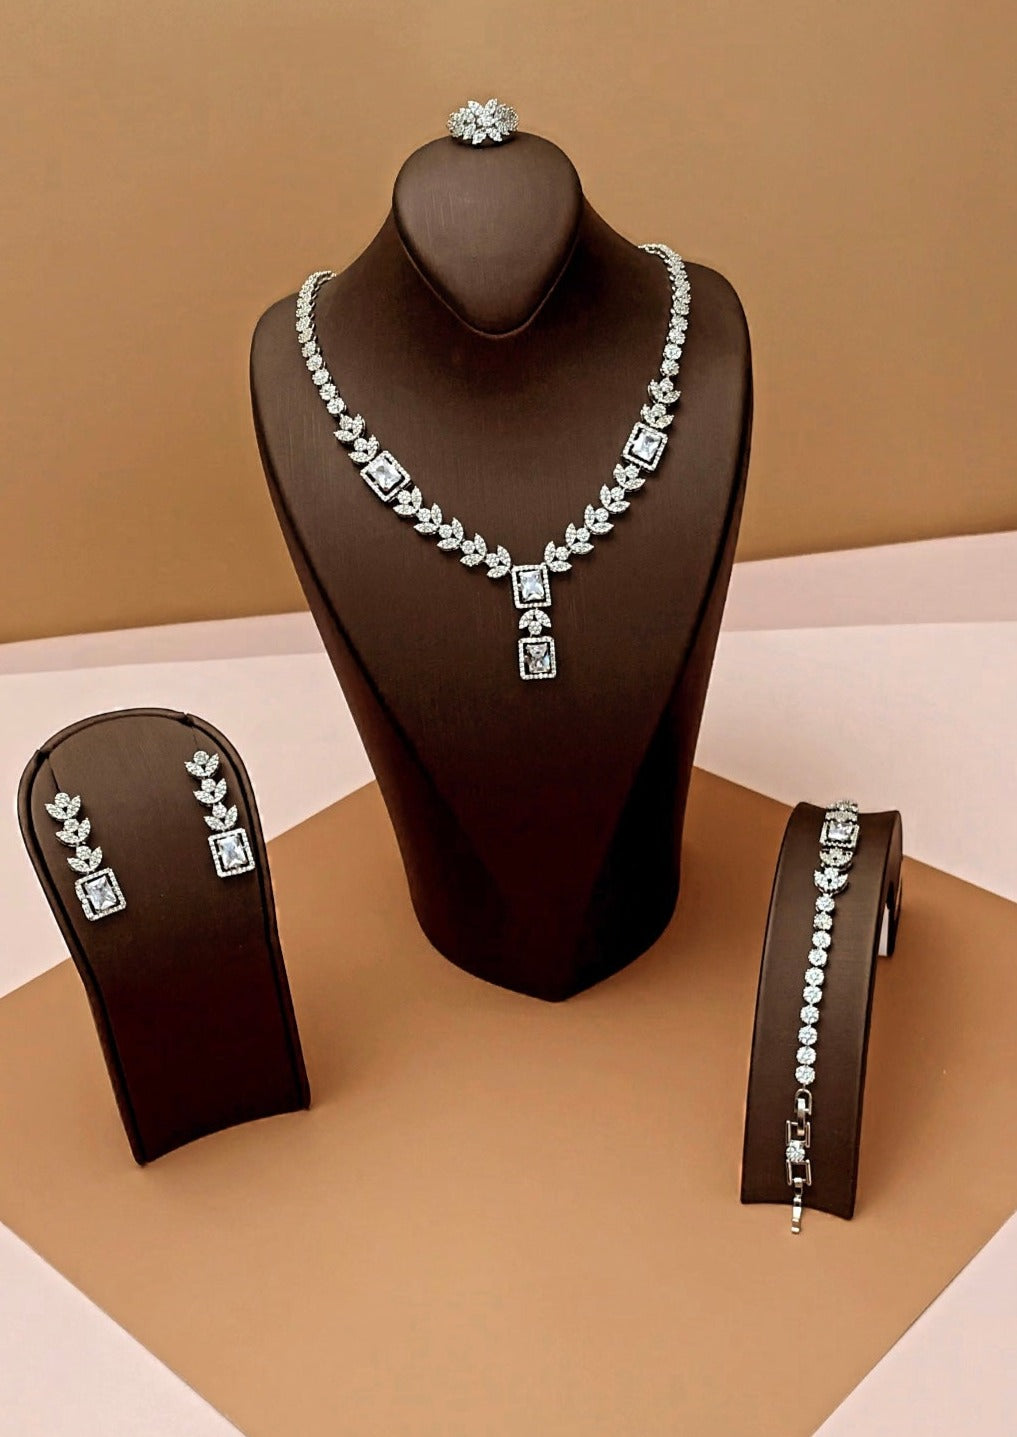 CAROLINE Jewelry Set with Necklace, Bracelet, Earrings and Ring - SAMPLE SALE